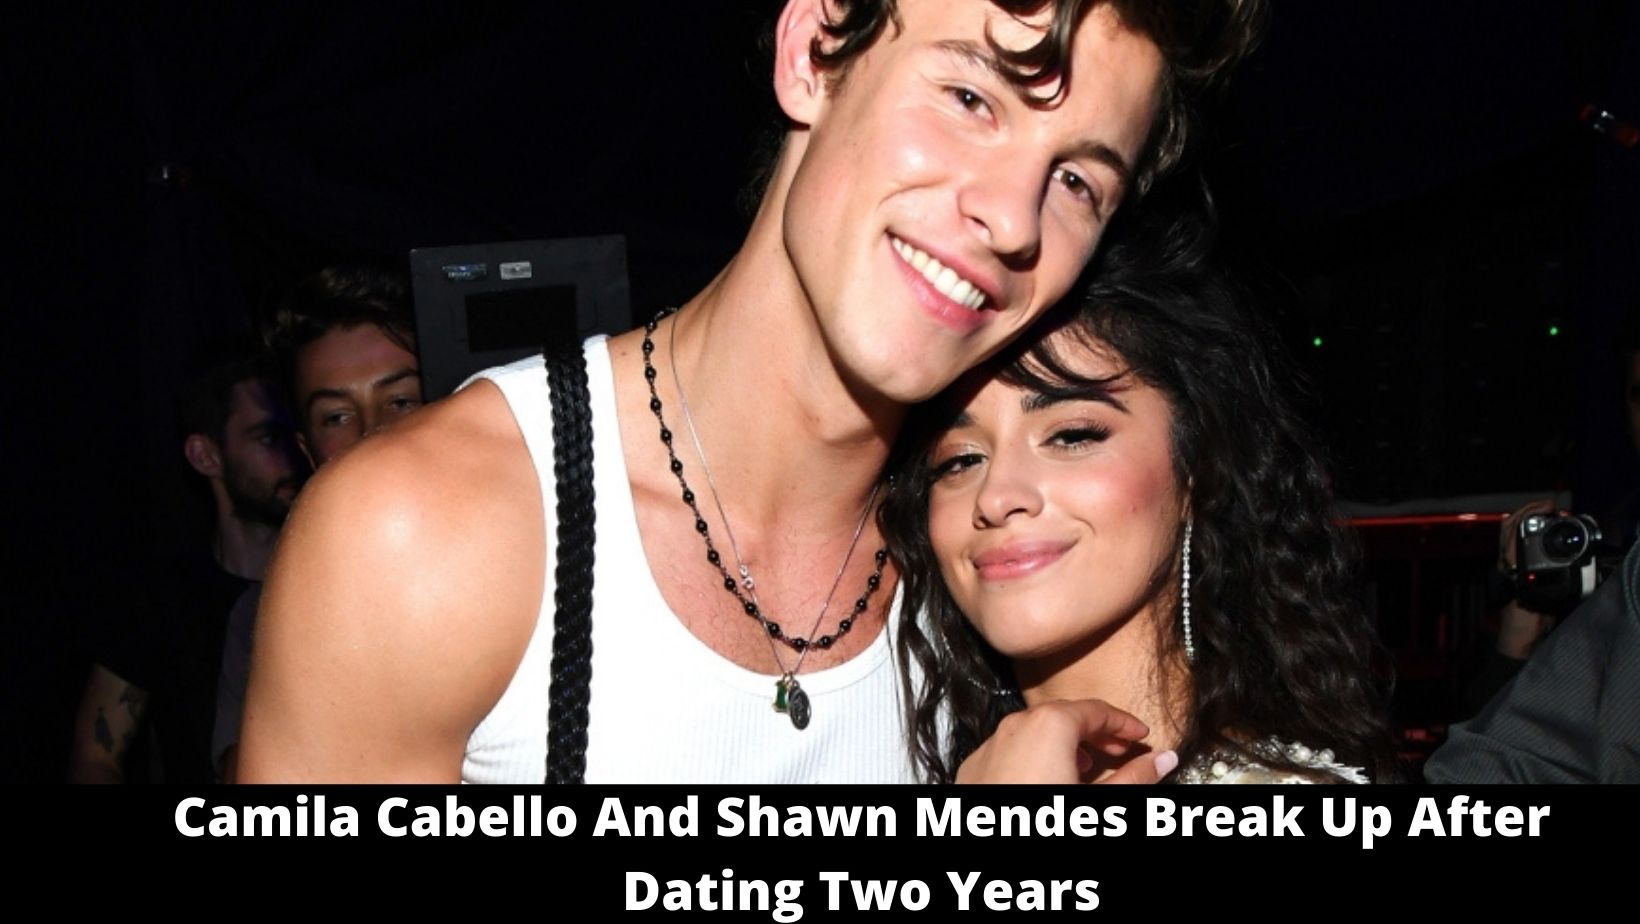 Camila Cabello And Shawn Mendes Break Up